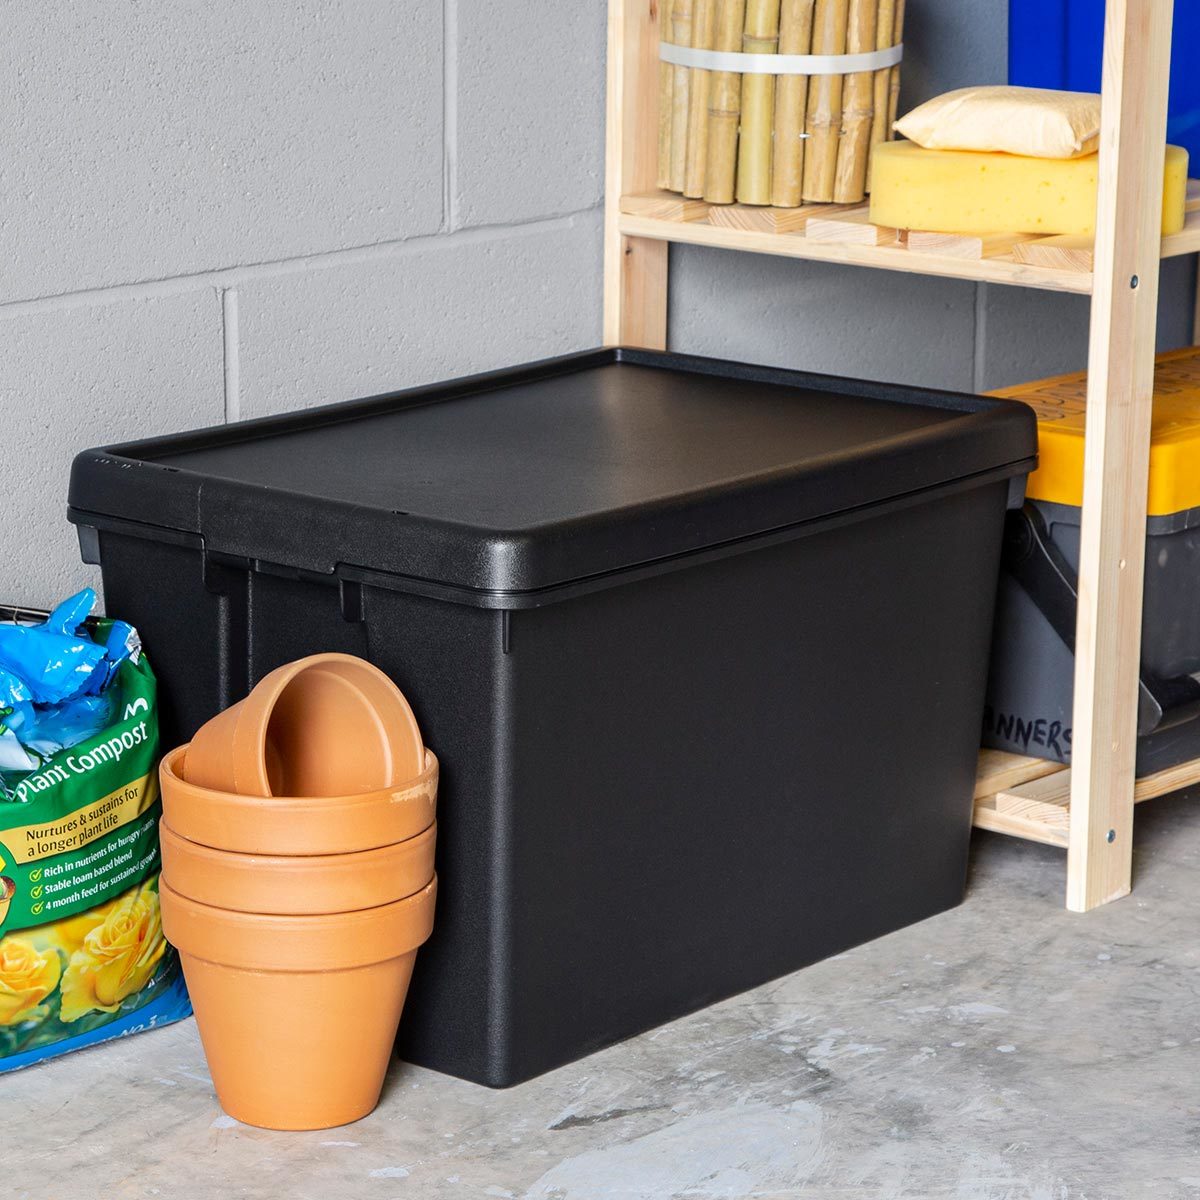 Wham Bam 62 Litre Recycled Heavy Duty Plastic Storage Box & Lid in Black